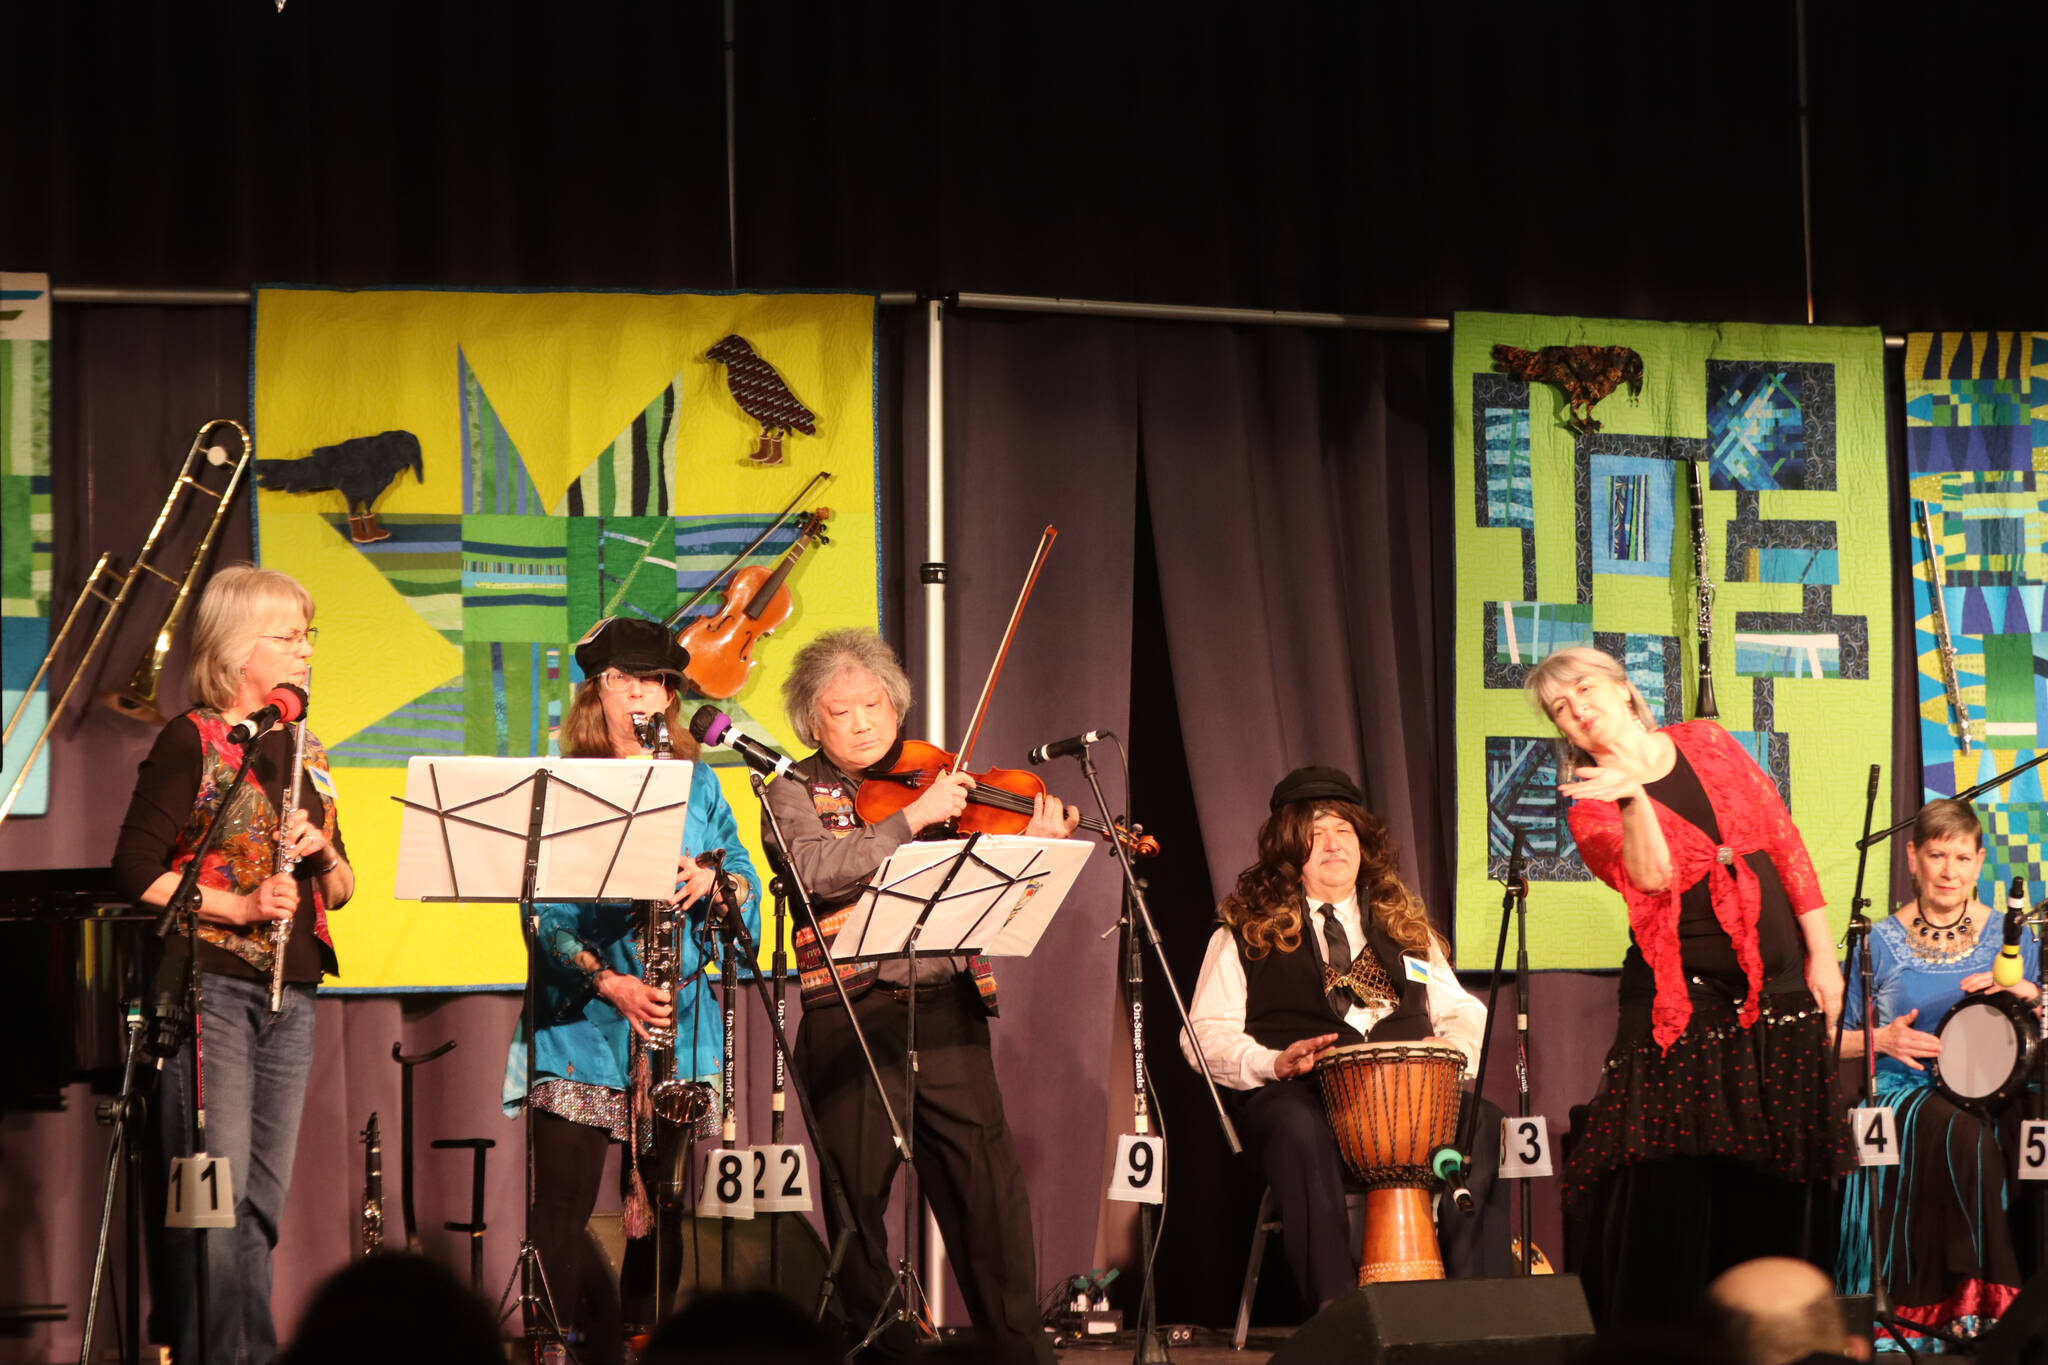 Jonson Kuhn / Juneau Empire
Beth Leibowitz, Cecily Morris, Jacque Farnsworth, Phyllis Scott, Steve Tada, Jean Butler, Delores O’Mara and Steve Winker of Escape from Brooklyn perform for the 48th Annual Alaska Folk Festival which kicked off on Monday at the Juneau Arts and Culture Center.